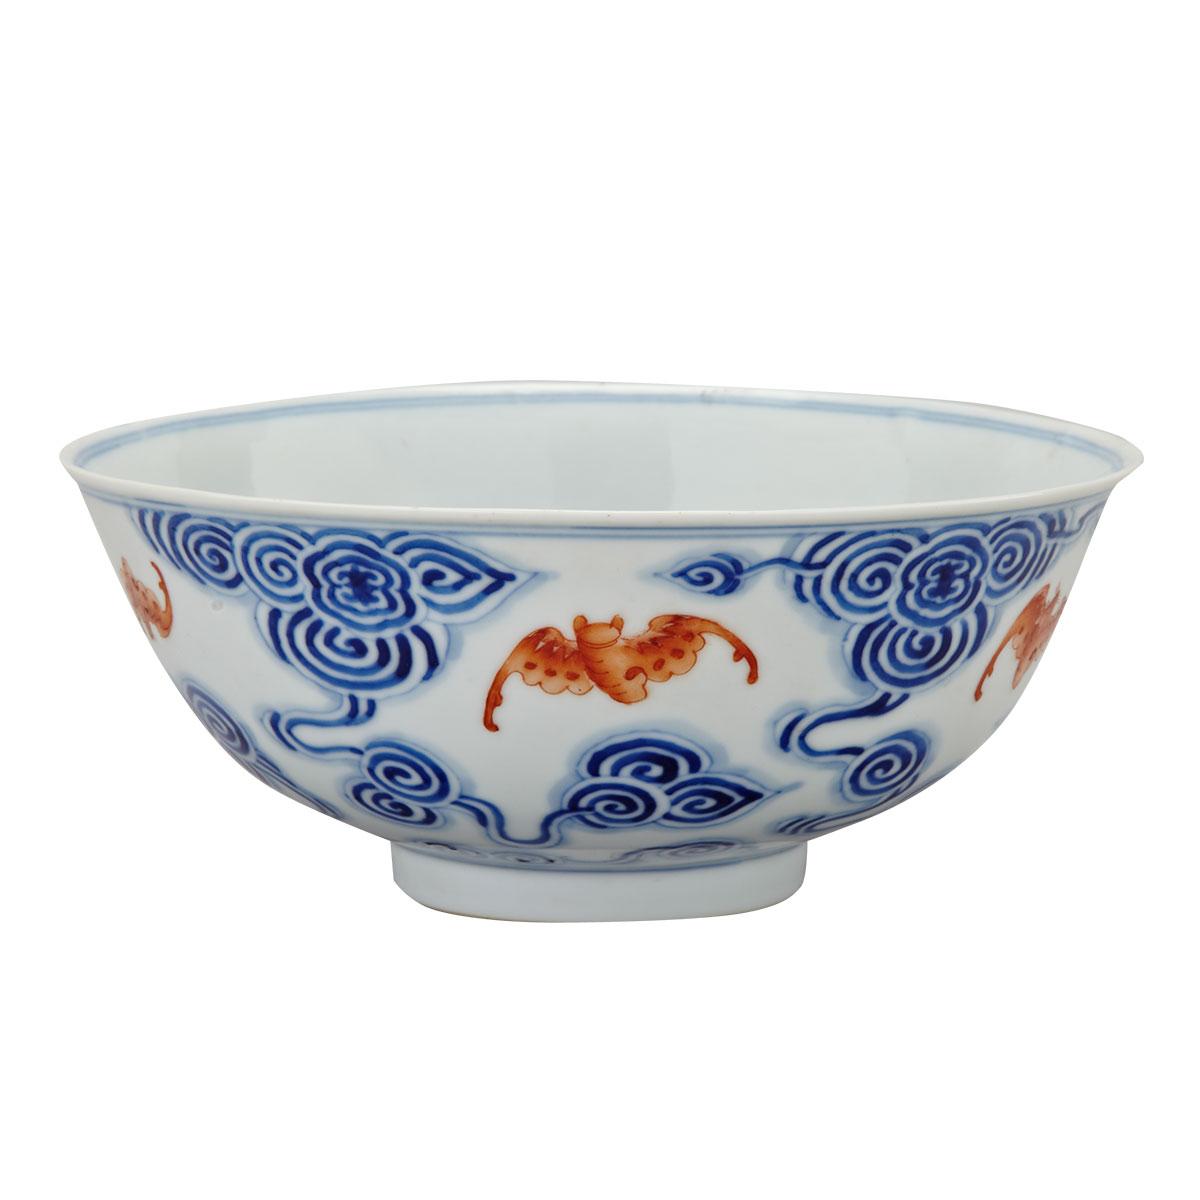 Blue, White and Iron Red Bat Bowl, Guangxu Mark and Period (1875-1908)